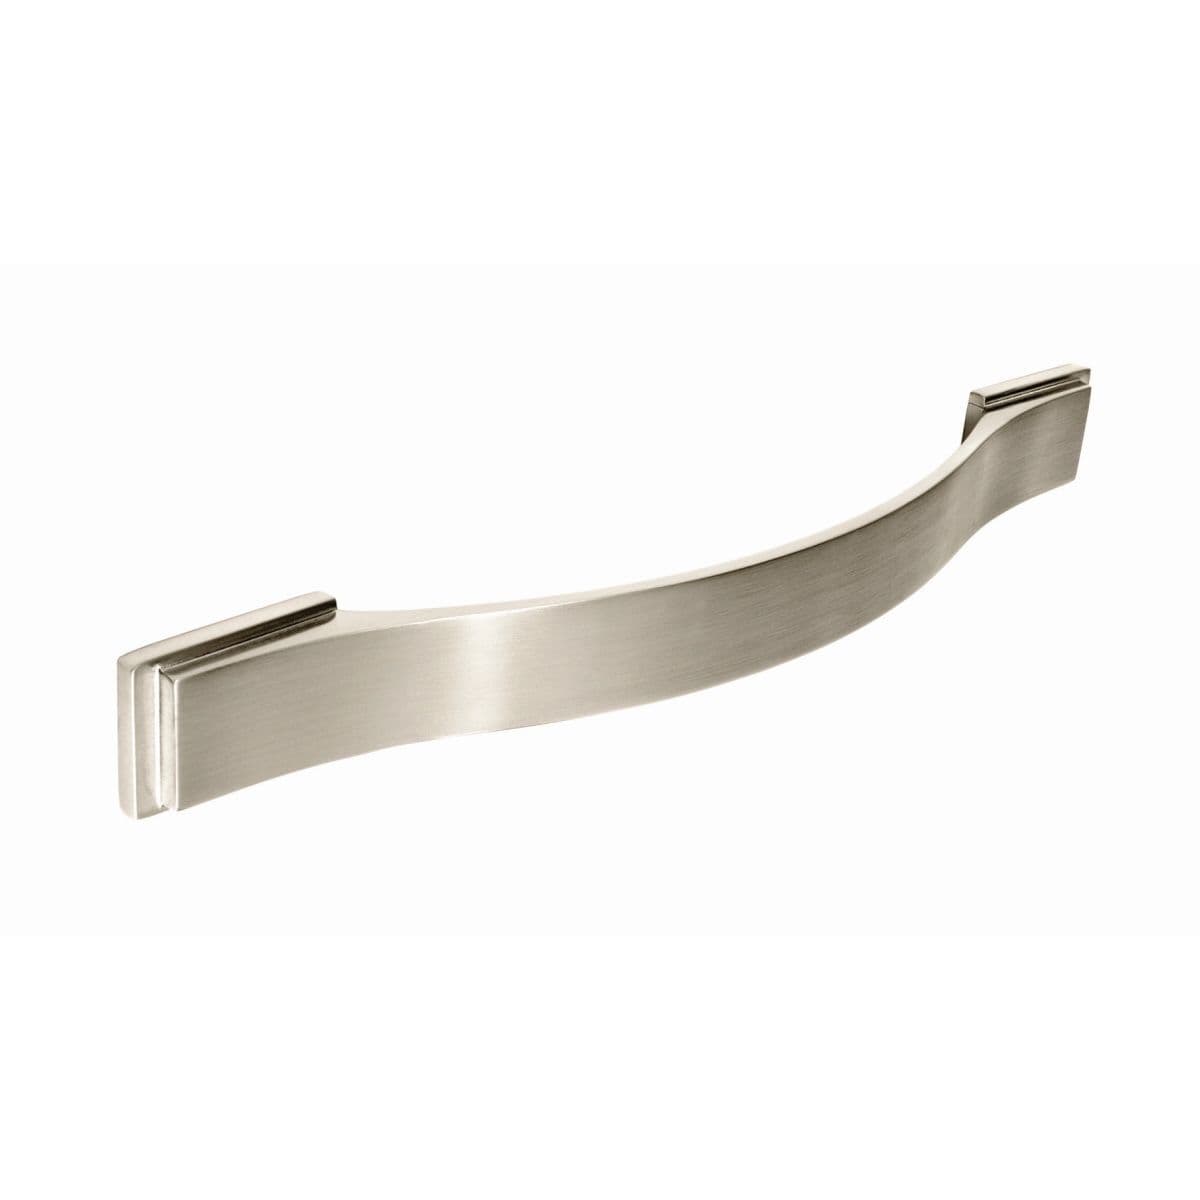 KIRKBY BOW Cupboard Handle - 160mm h/c  size - 2 finishes (PWS H523.160.SS / H524.160.CH)